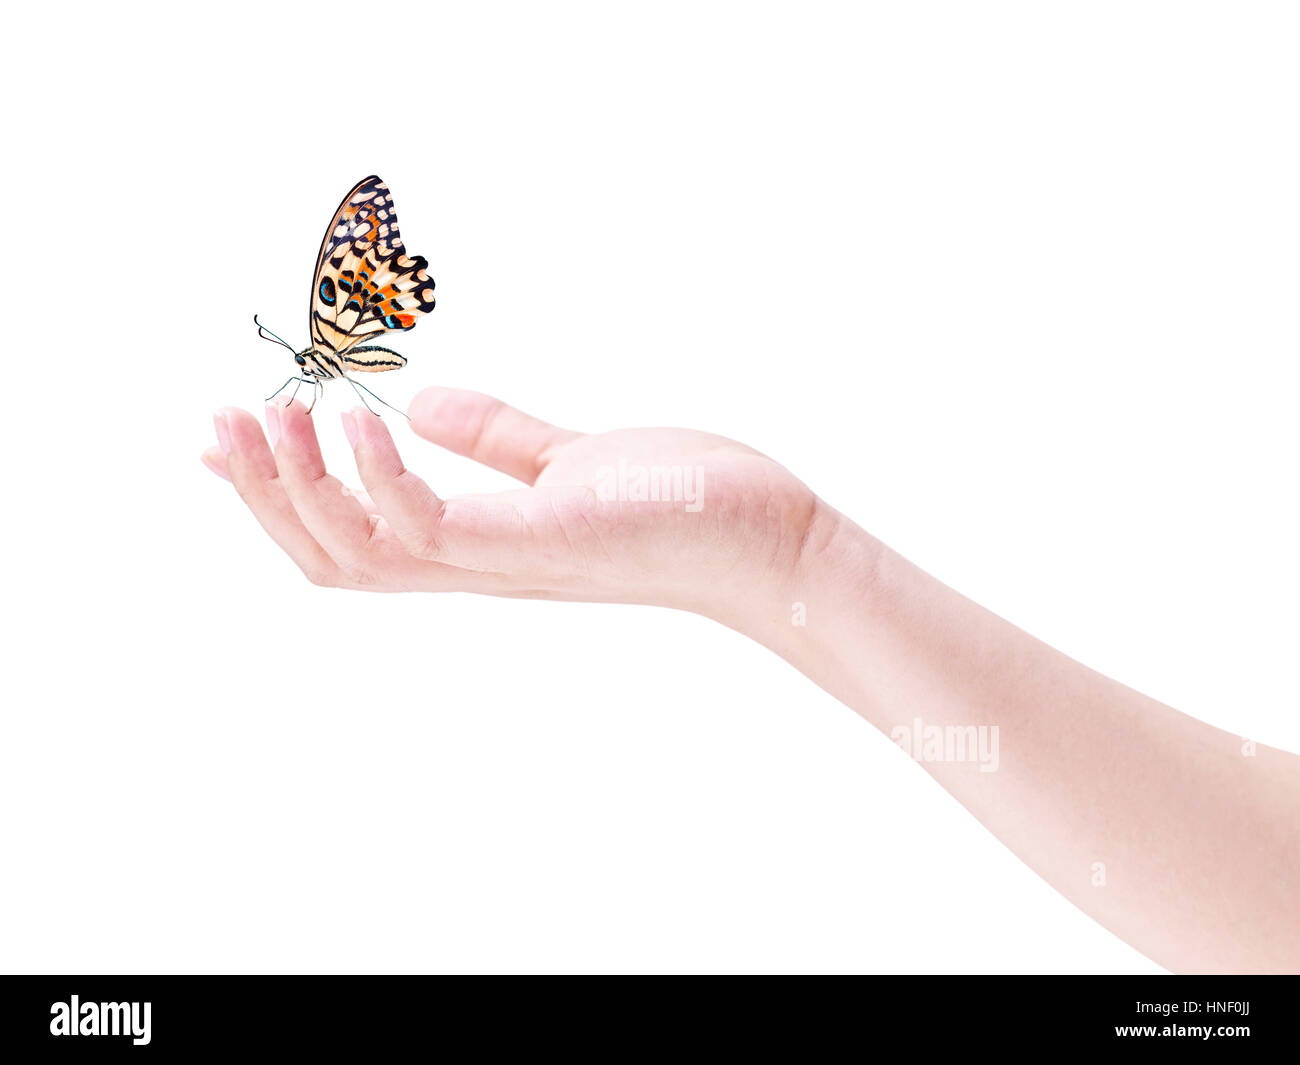 butterfly landing on the fingers of a human hand, isolated on white background. Stock Photo